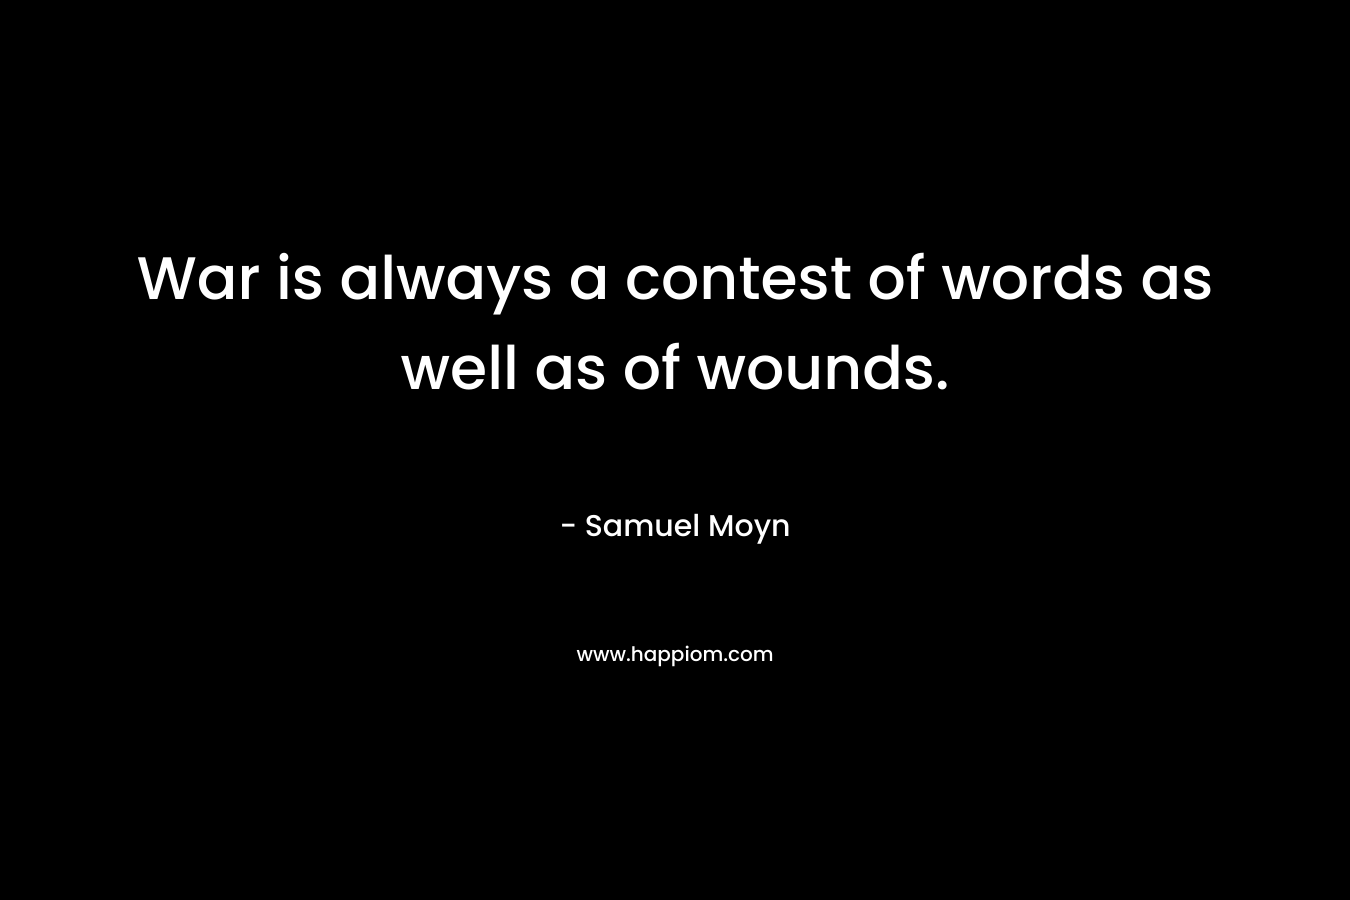 War is always a contest of words as well as of wounds. – Samuel Moyn